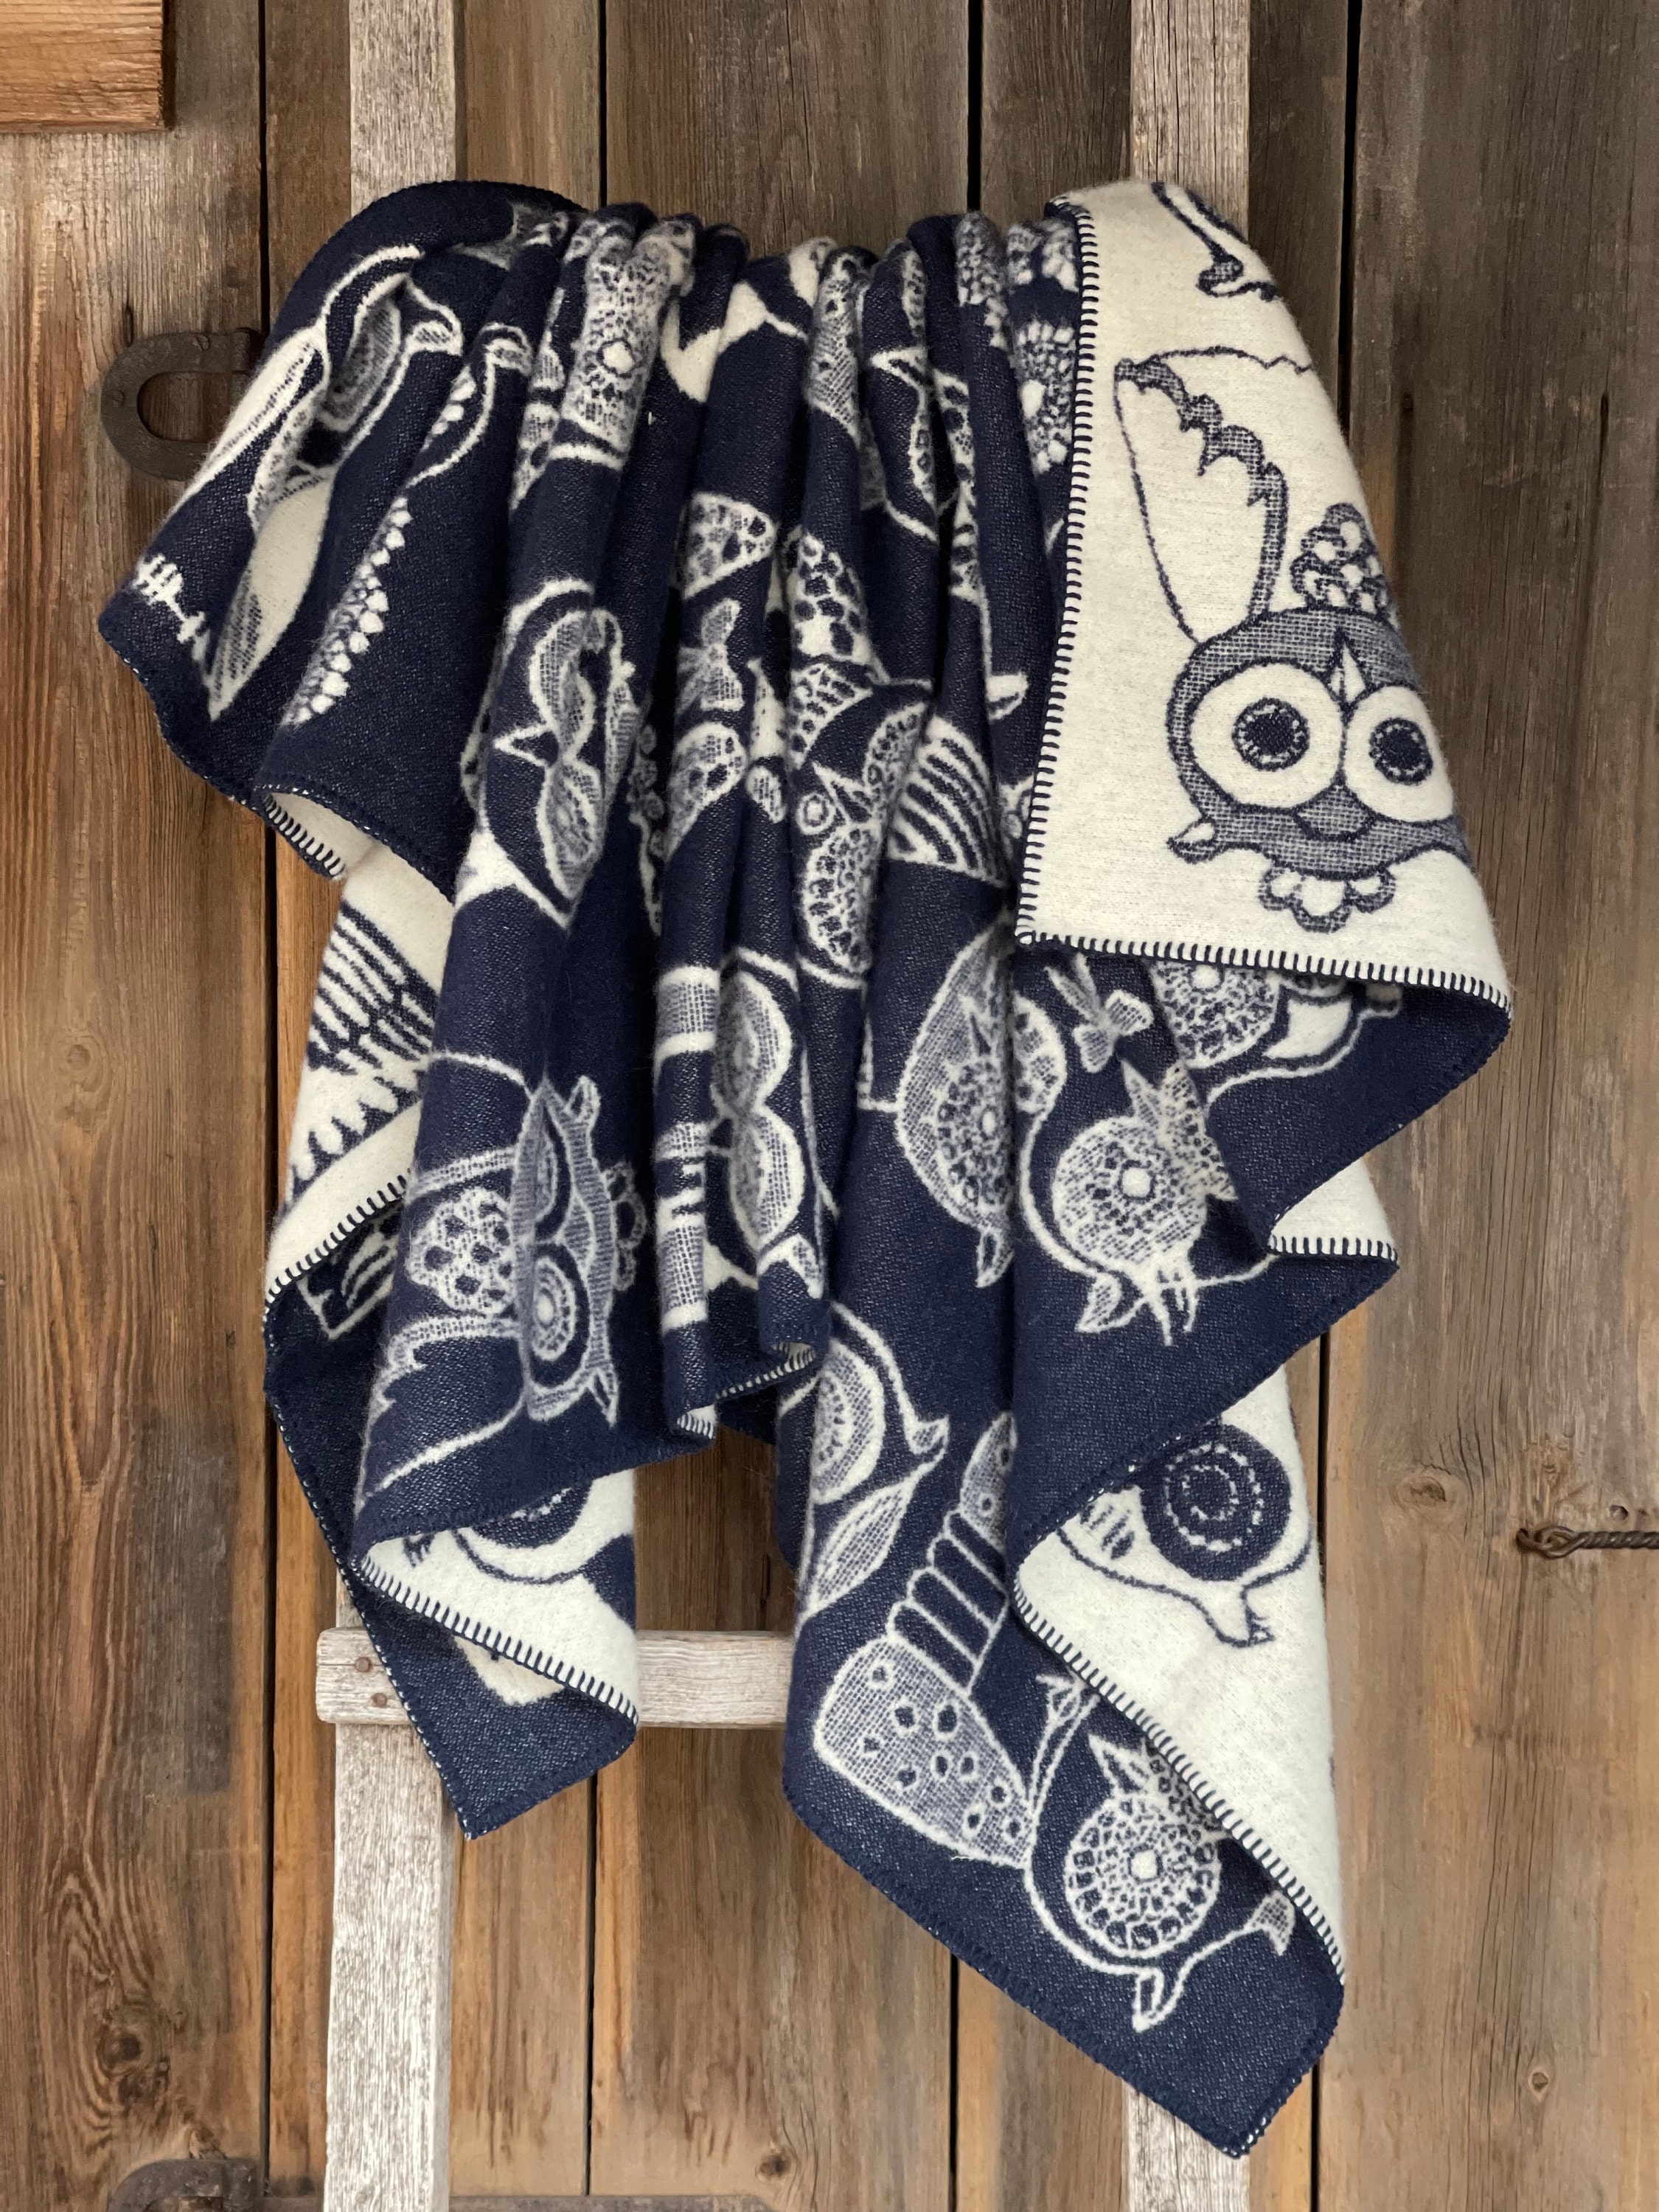 Navy blue lambswool blanket with cute owls Pure Wool throws blankets blanket Navy blue Owl blanket t